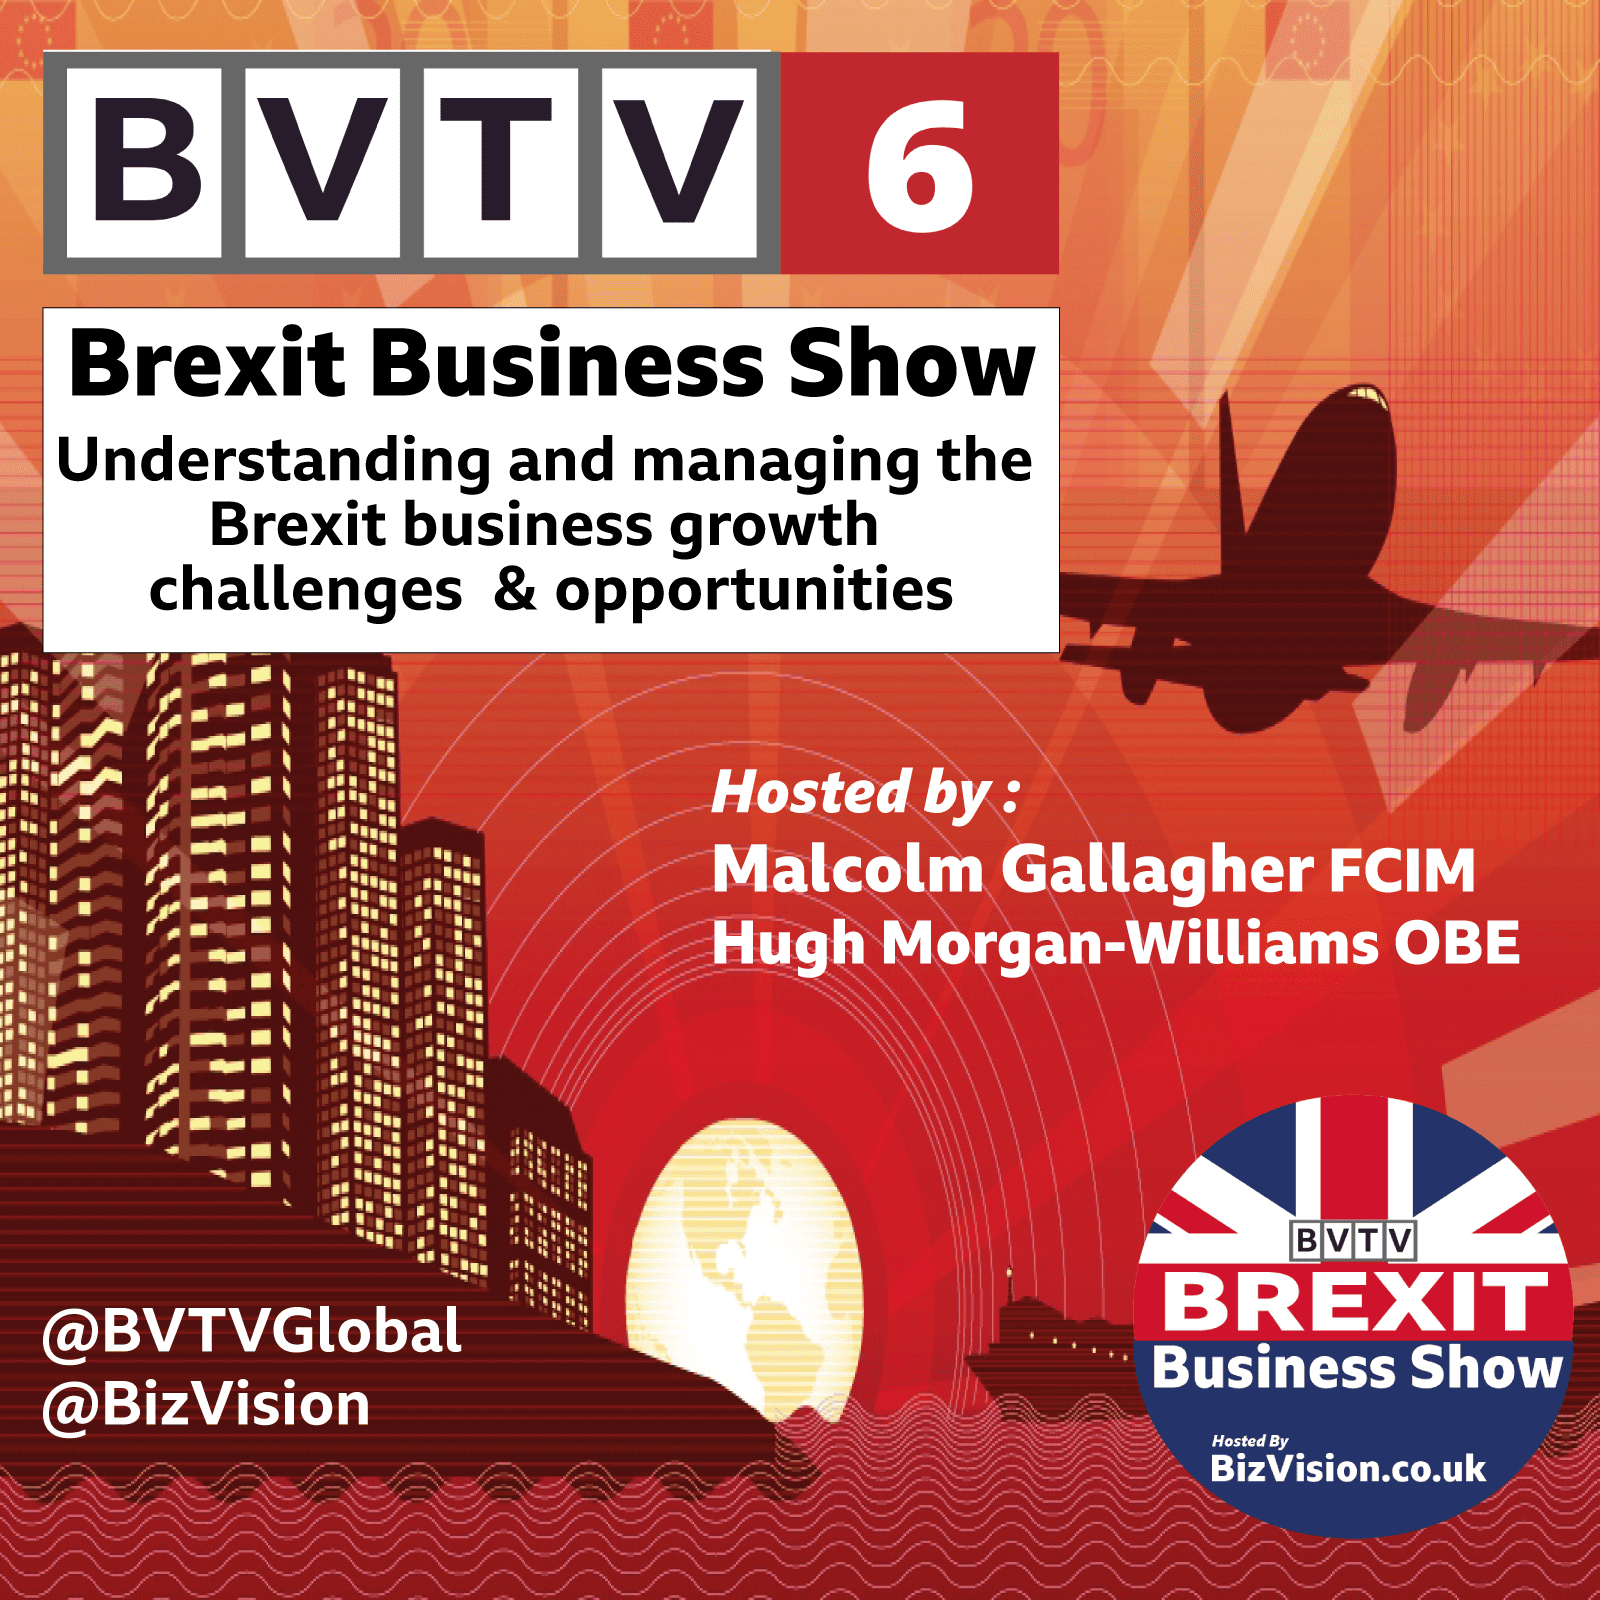 Acclaimed Brexit Business Show goes full video! New features to lift Brexit gloom.